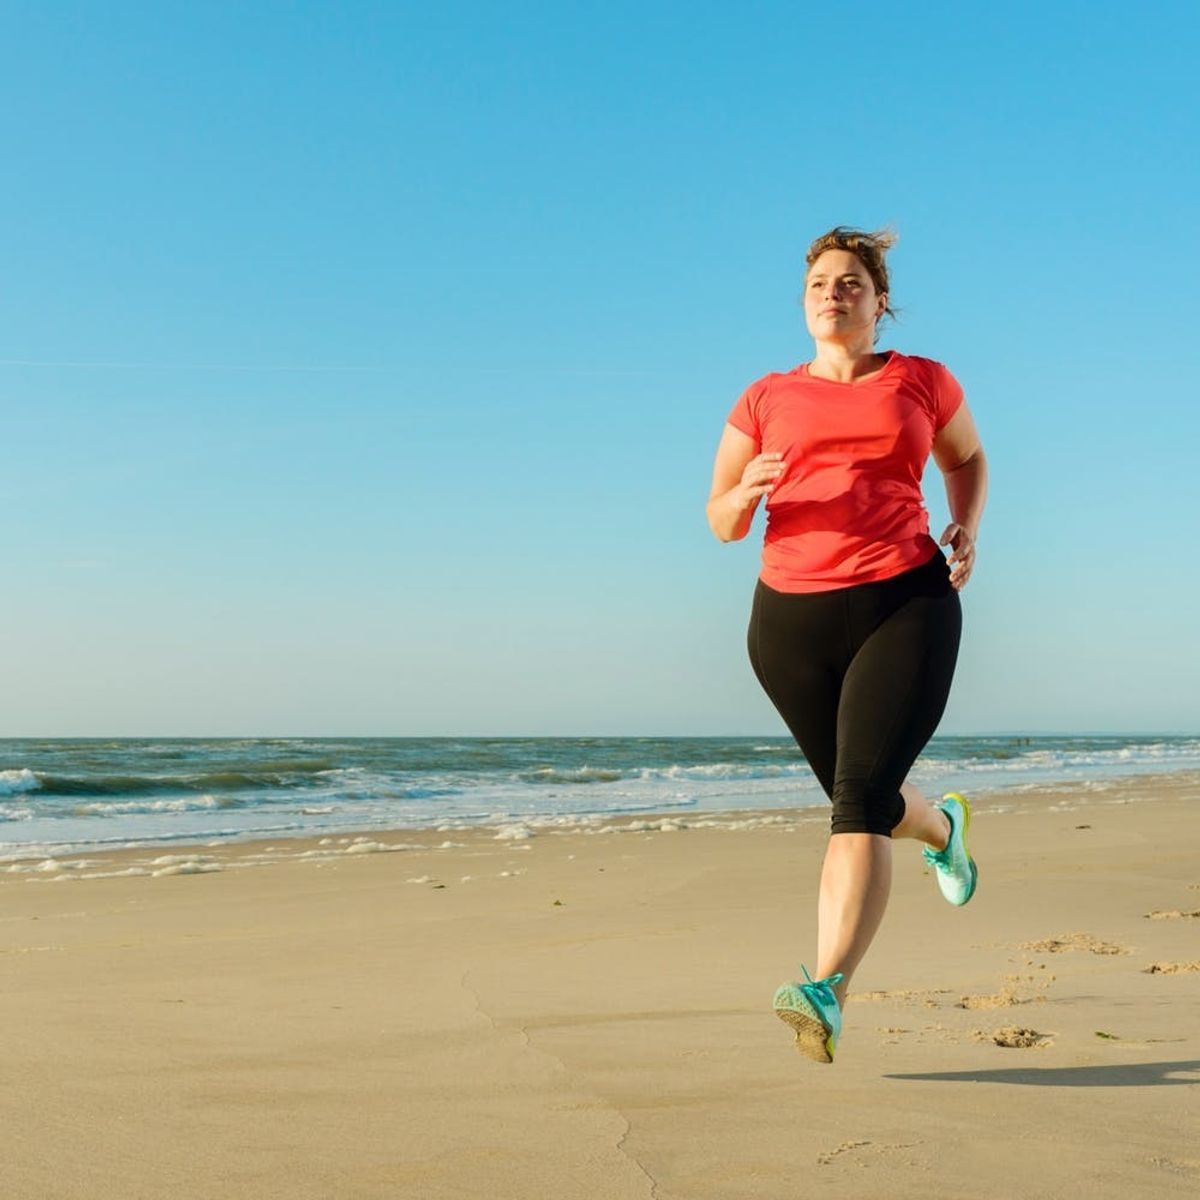 Here’s What Happened When I Went From Couch Potato to Exercising for 30 Days Straight